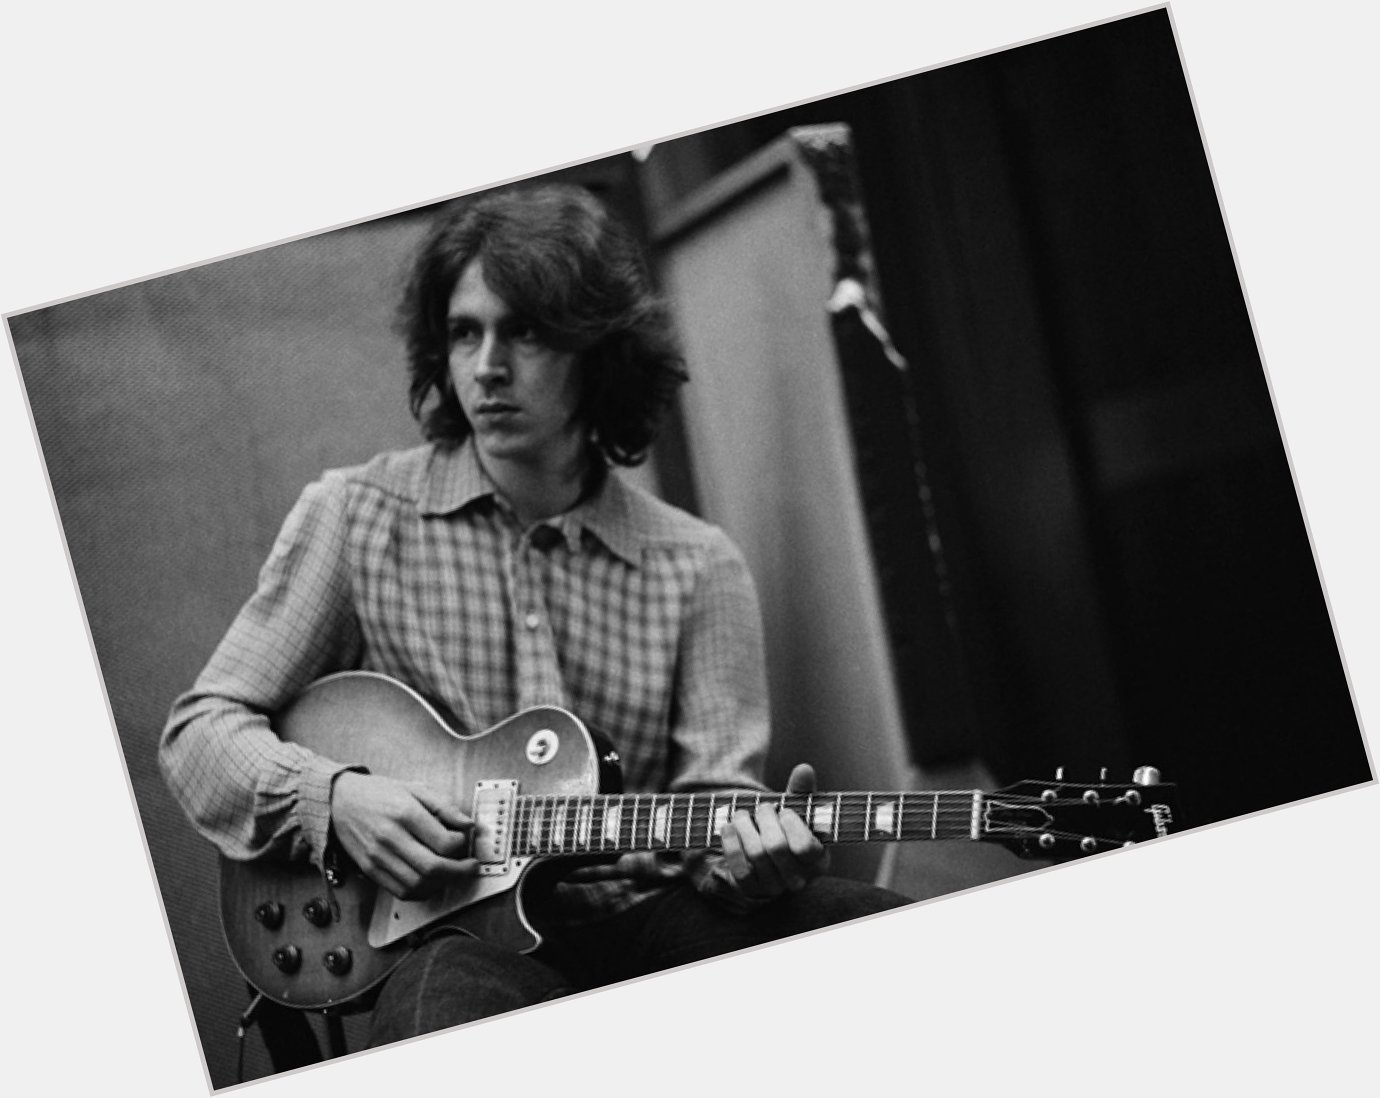 Happy seventy second birthday to one of my favourite guitar players, Mick Taylor! Tone! Vibrato! Phrasing! 